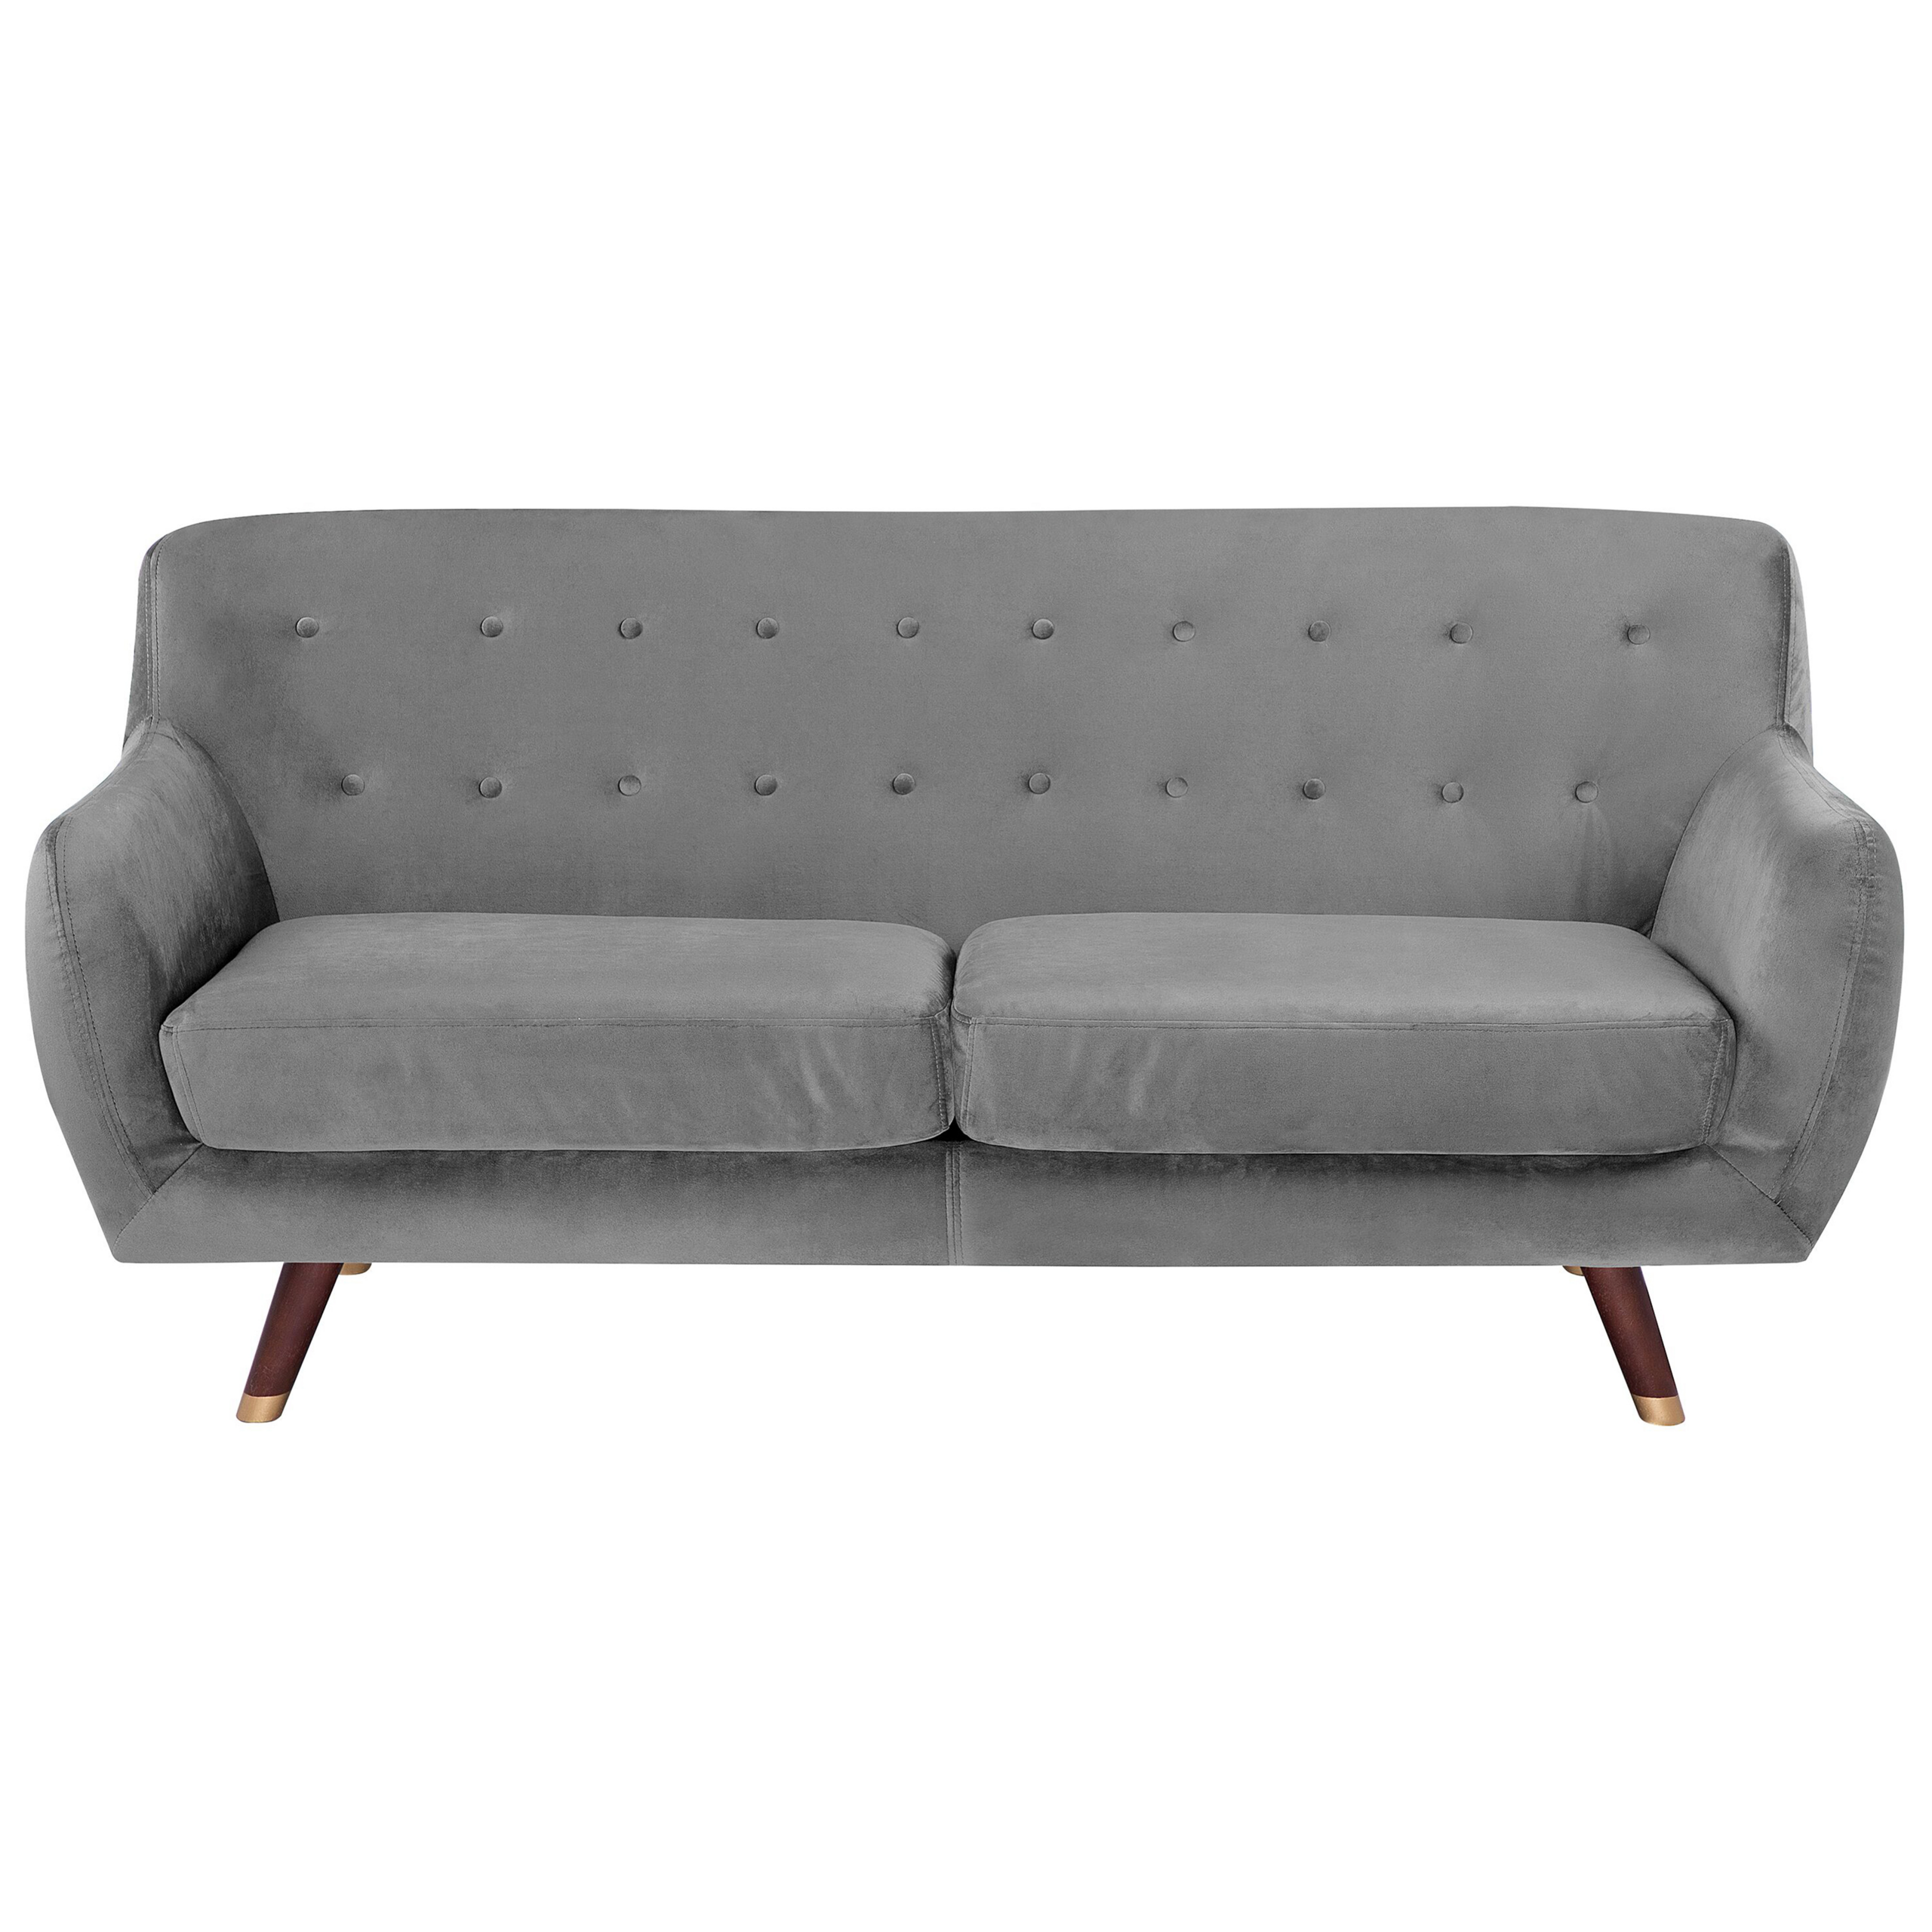 Beliani Sofa Grey Velvet 3 Seater Button Tufted Back Cushioned Seat Wooden Legs